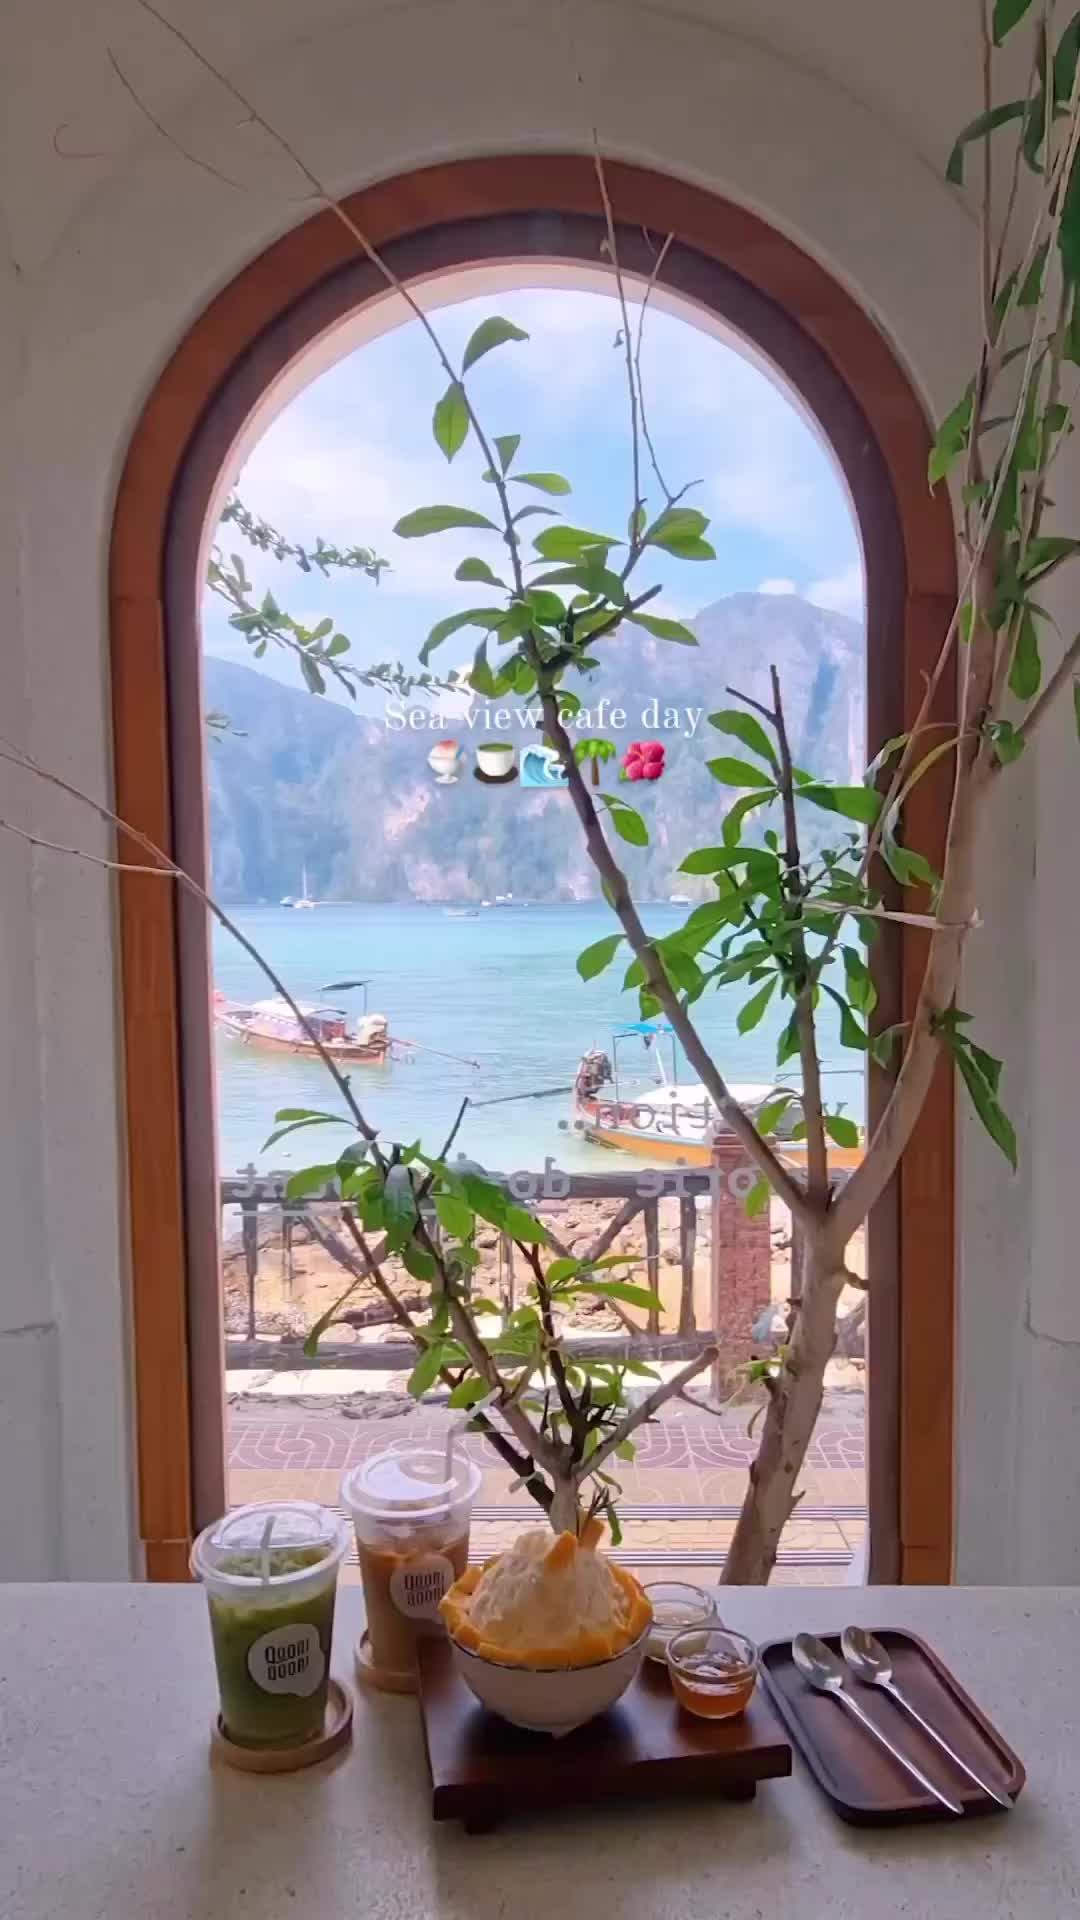 Quaint Cafe Overlooking the Sea in Phi Phi Island